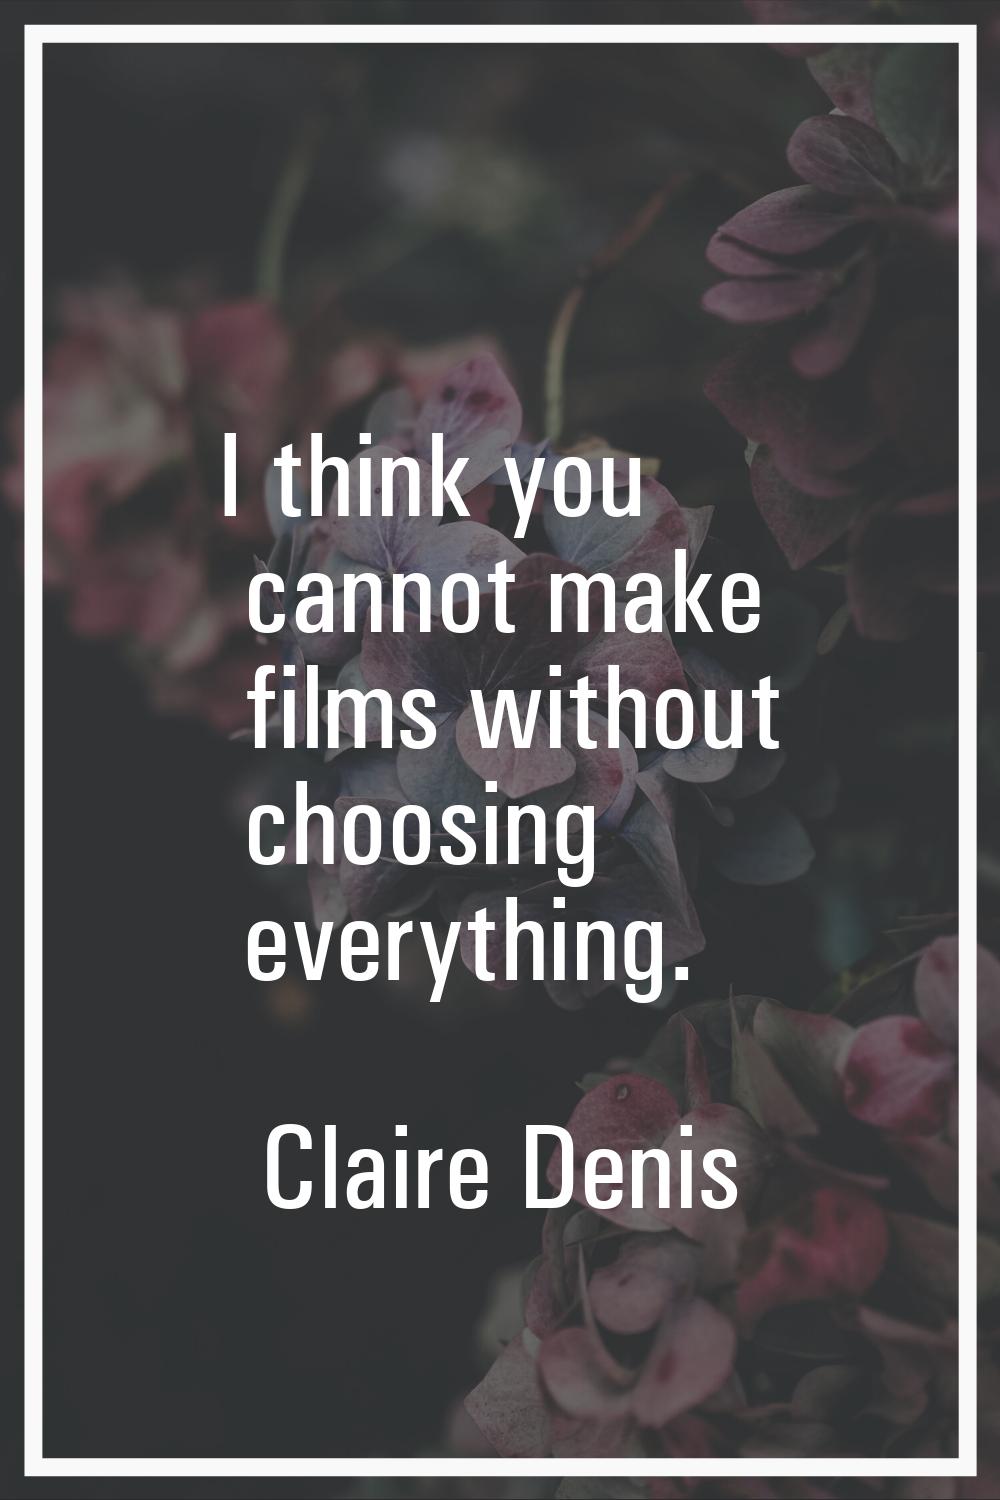 I think you cannot make films without choosing everything.